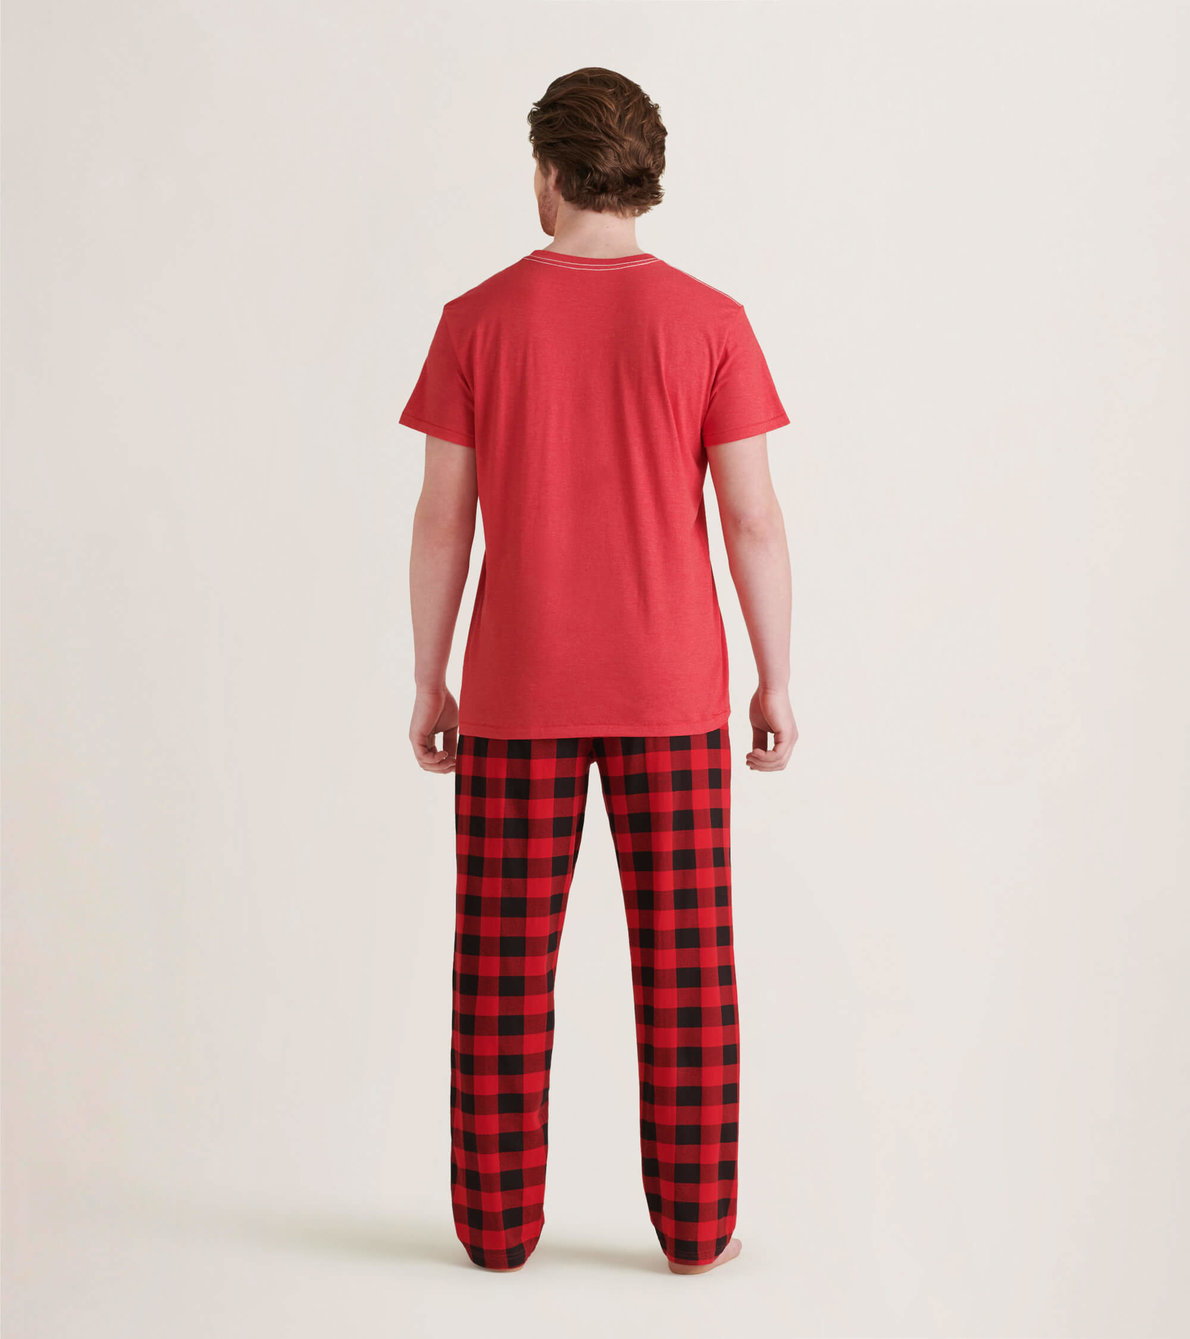 View larger image of Wild About Hockey Men's Tee and Pants Pajama Separates